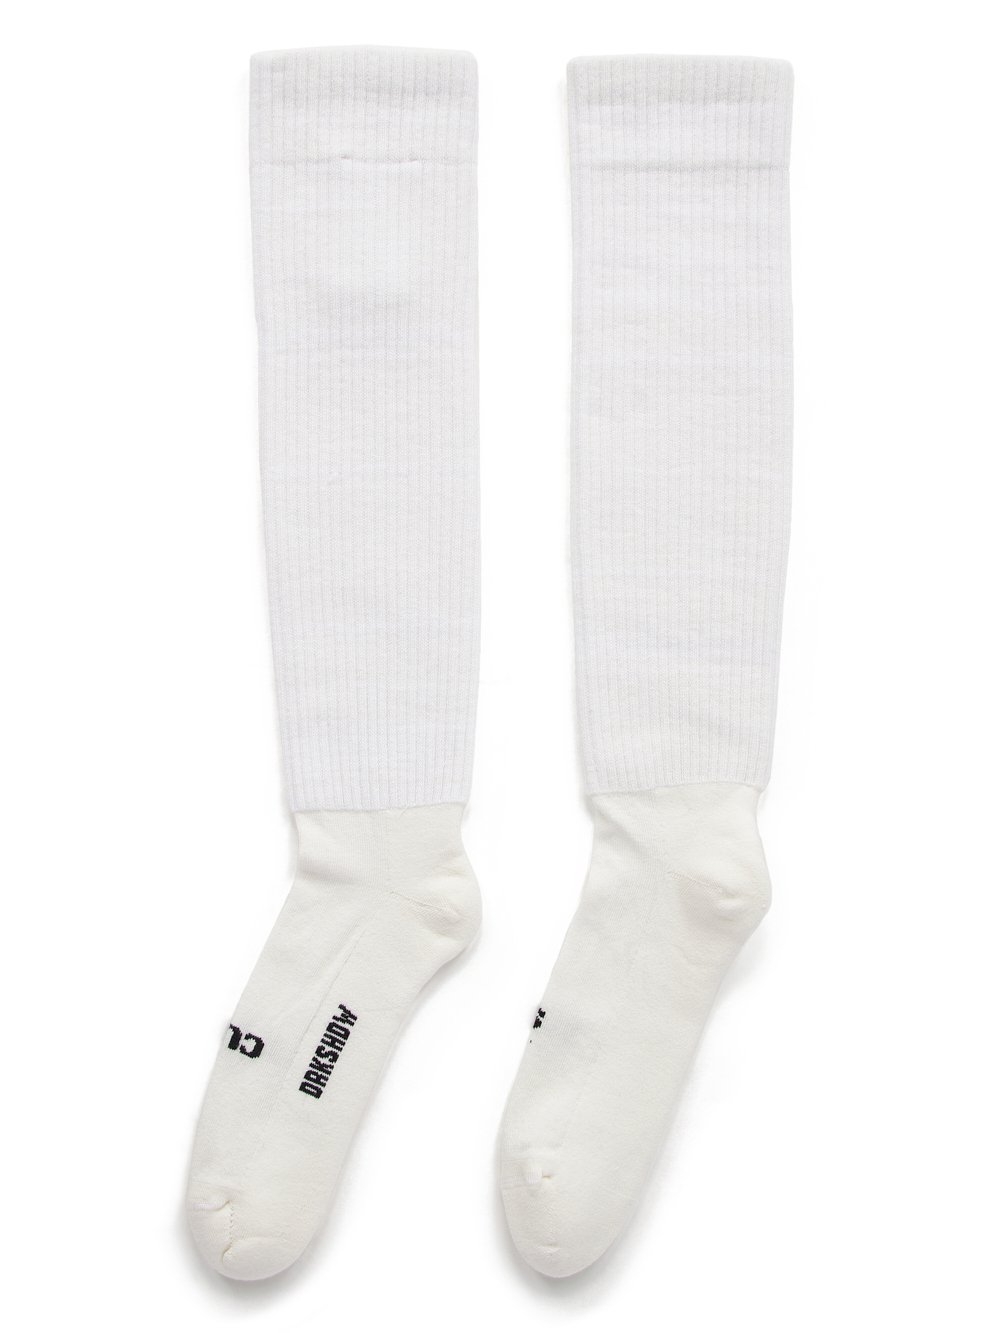 RICK OWENS FW23 LUXOR HIGH SOCKS SO CUNT IN MILK AND BLACK COTTON KNIT